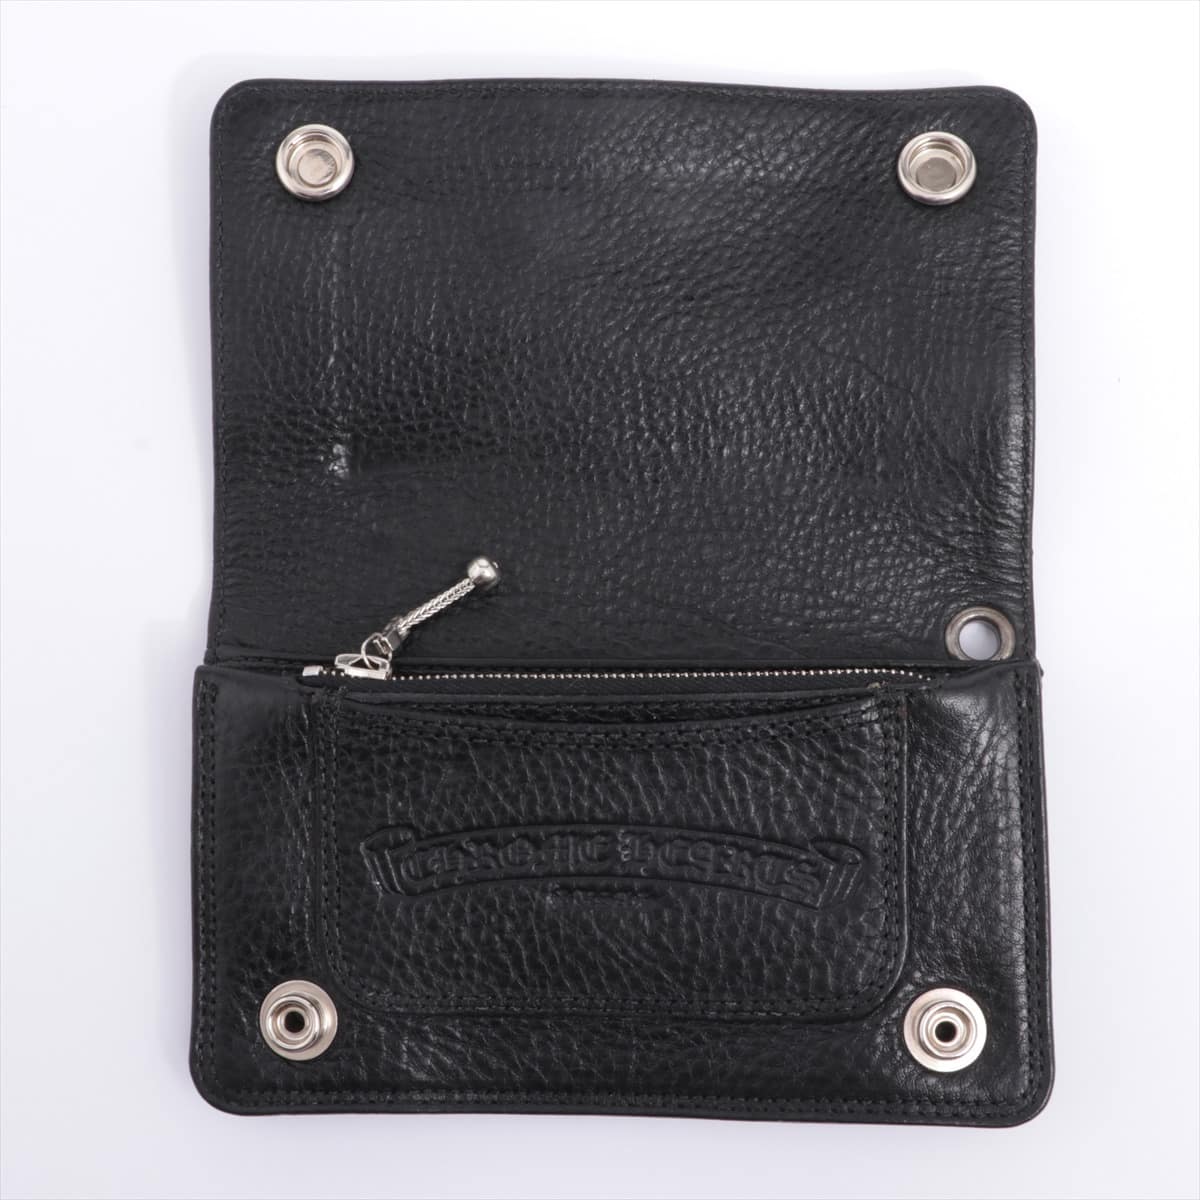 Chrome Hearts 1zipp Wallet Leather With invoice Cross button